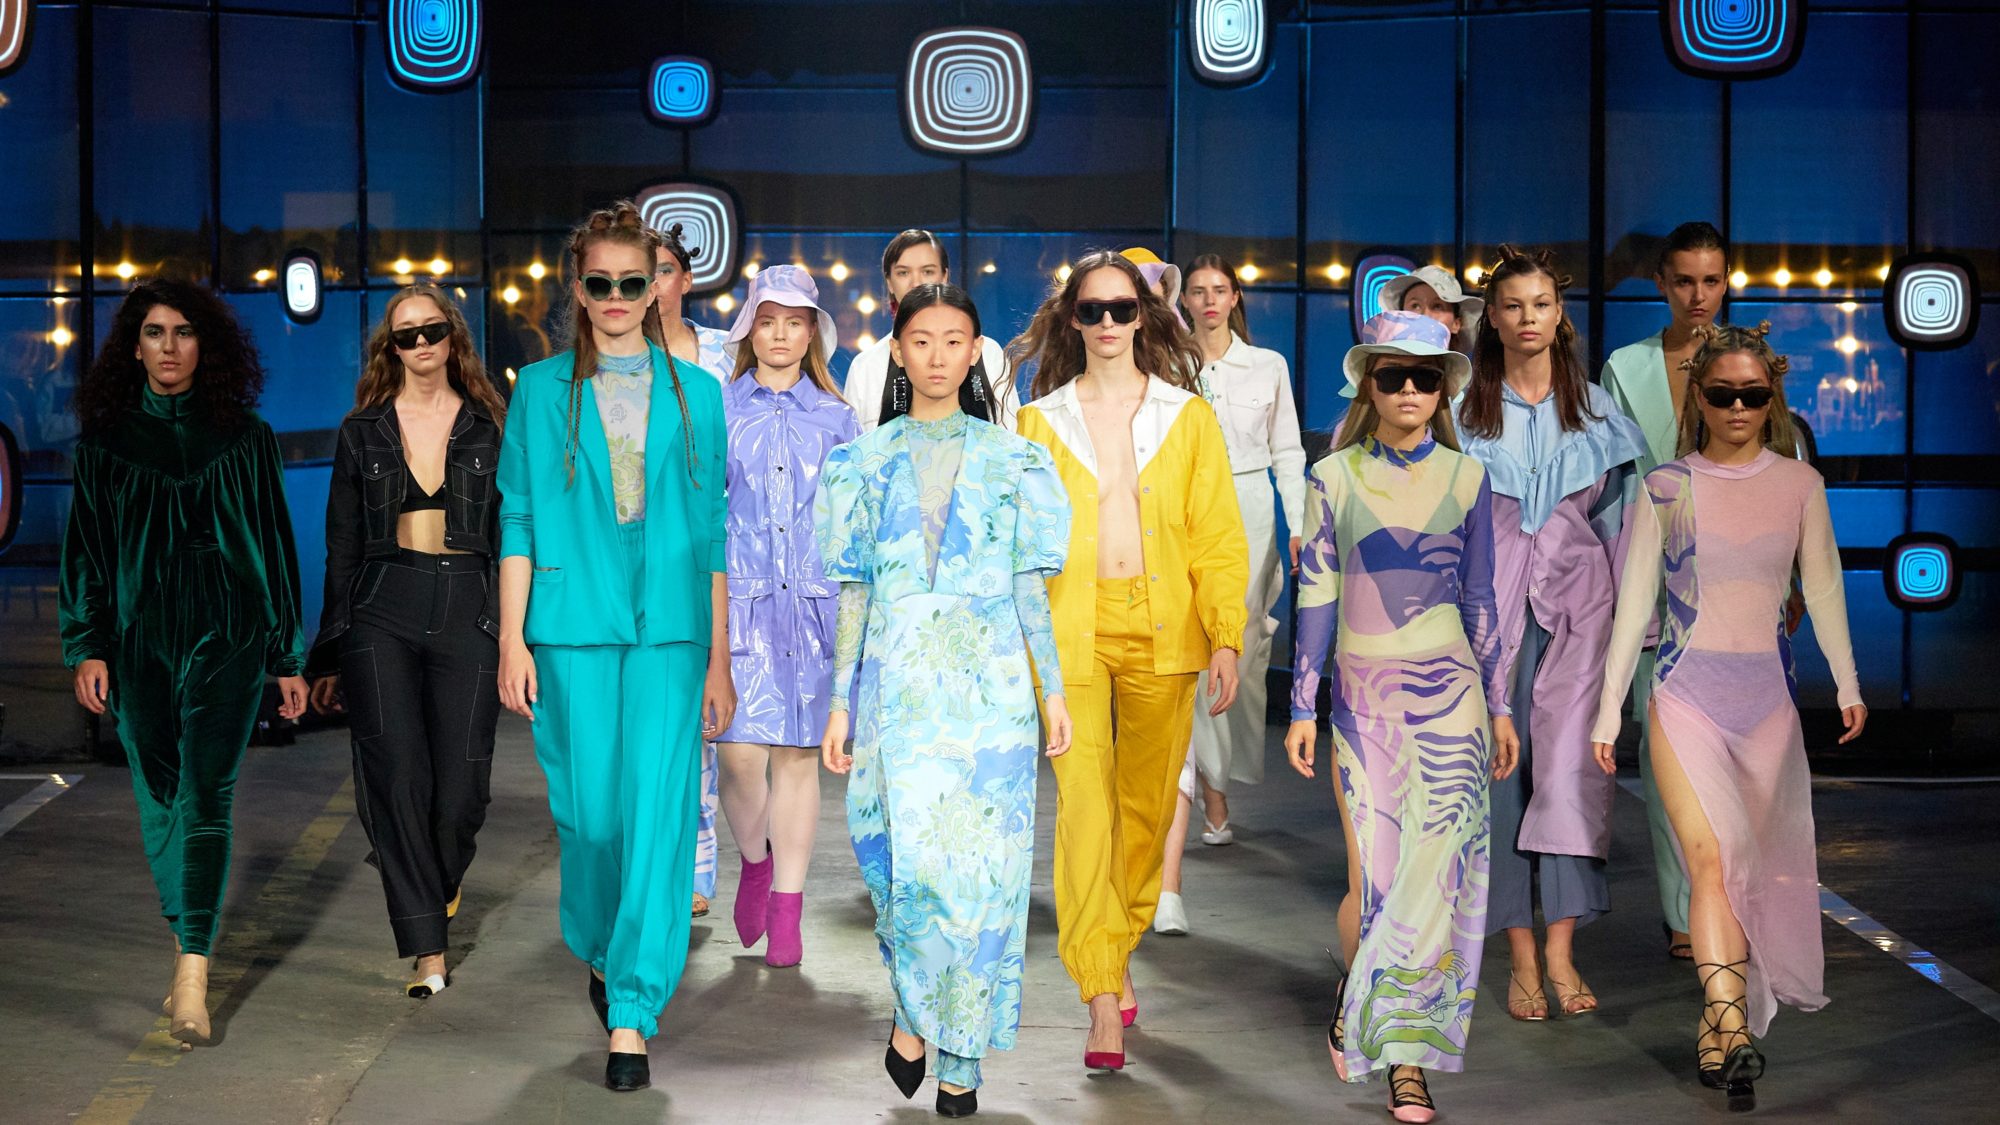 Fashion sector proving resilient as crowds descend on London Fashion Week